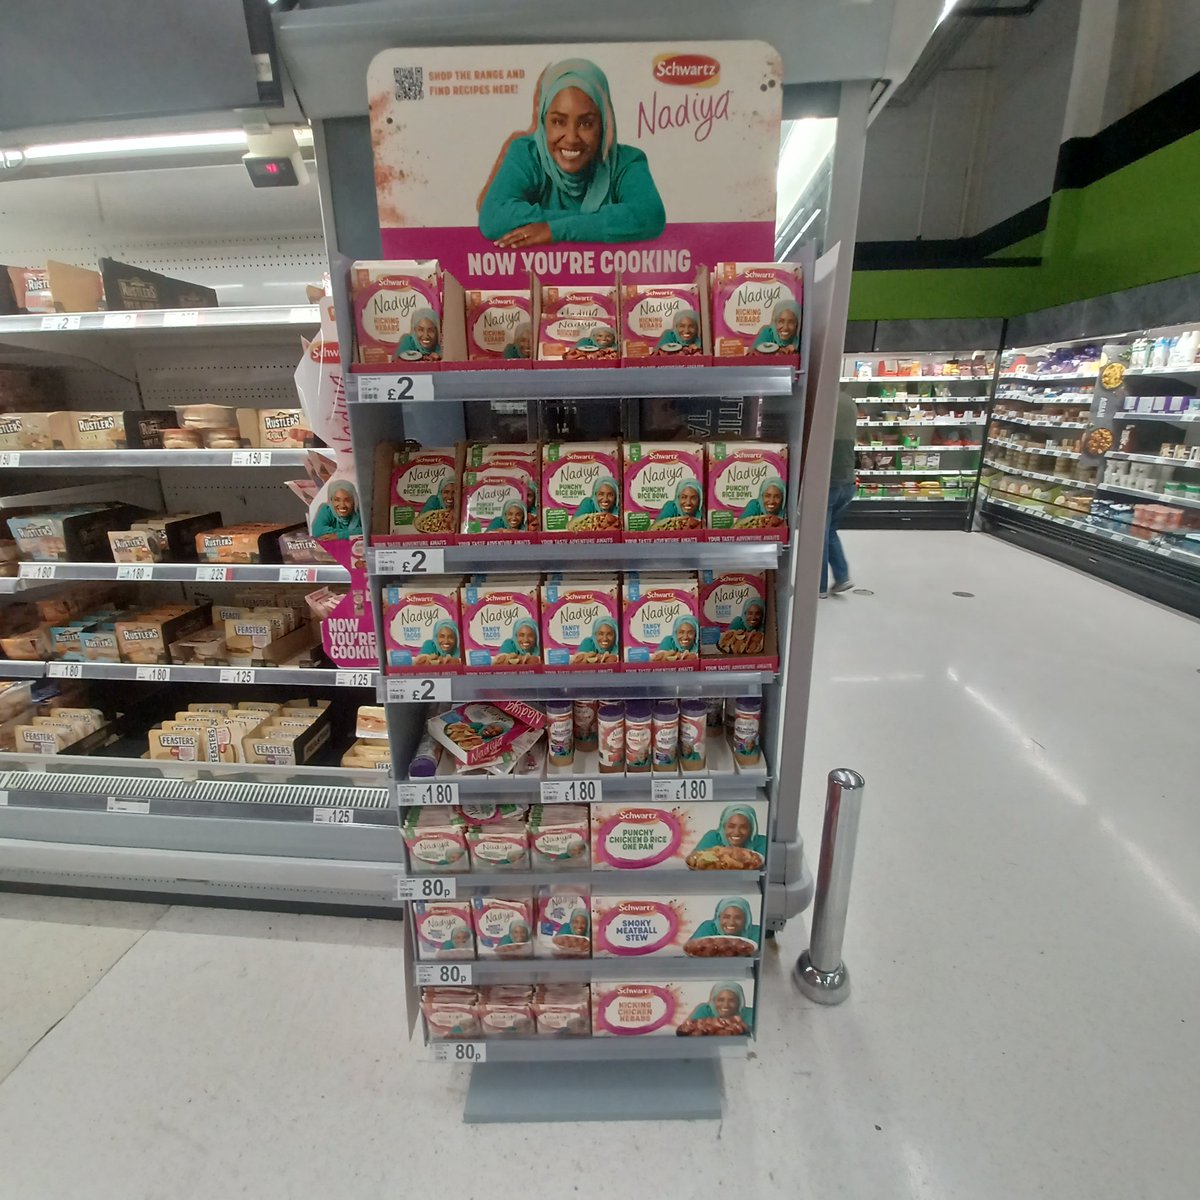 Pleased to see @BegumNadiya @Schwartzflavour #spice blends & #recipe kits so prominently displayed @asda #oldkentroad - loving the on shelf in aisle displays in particular. #nadiyahussain #licensing